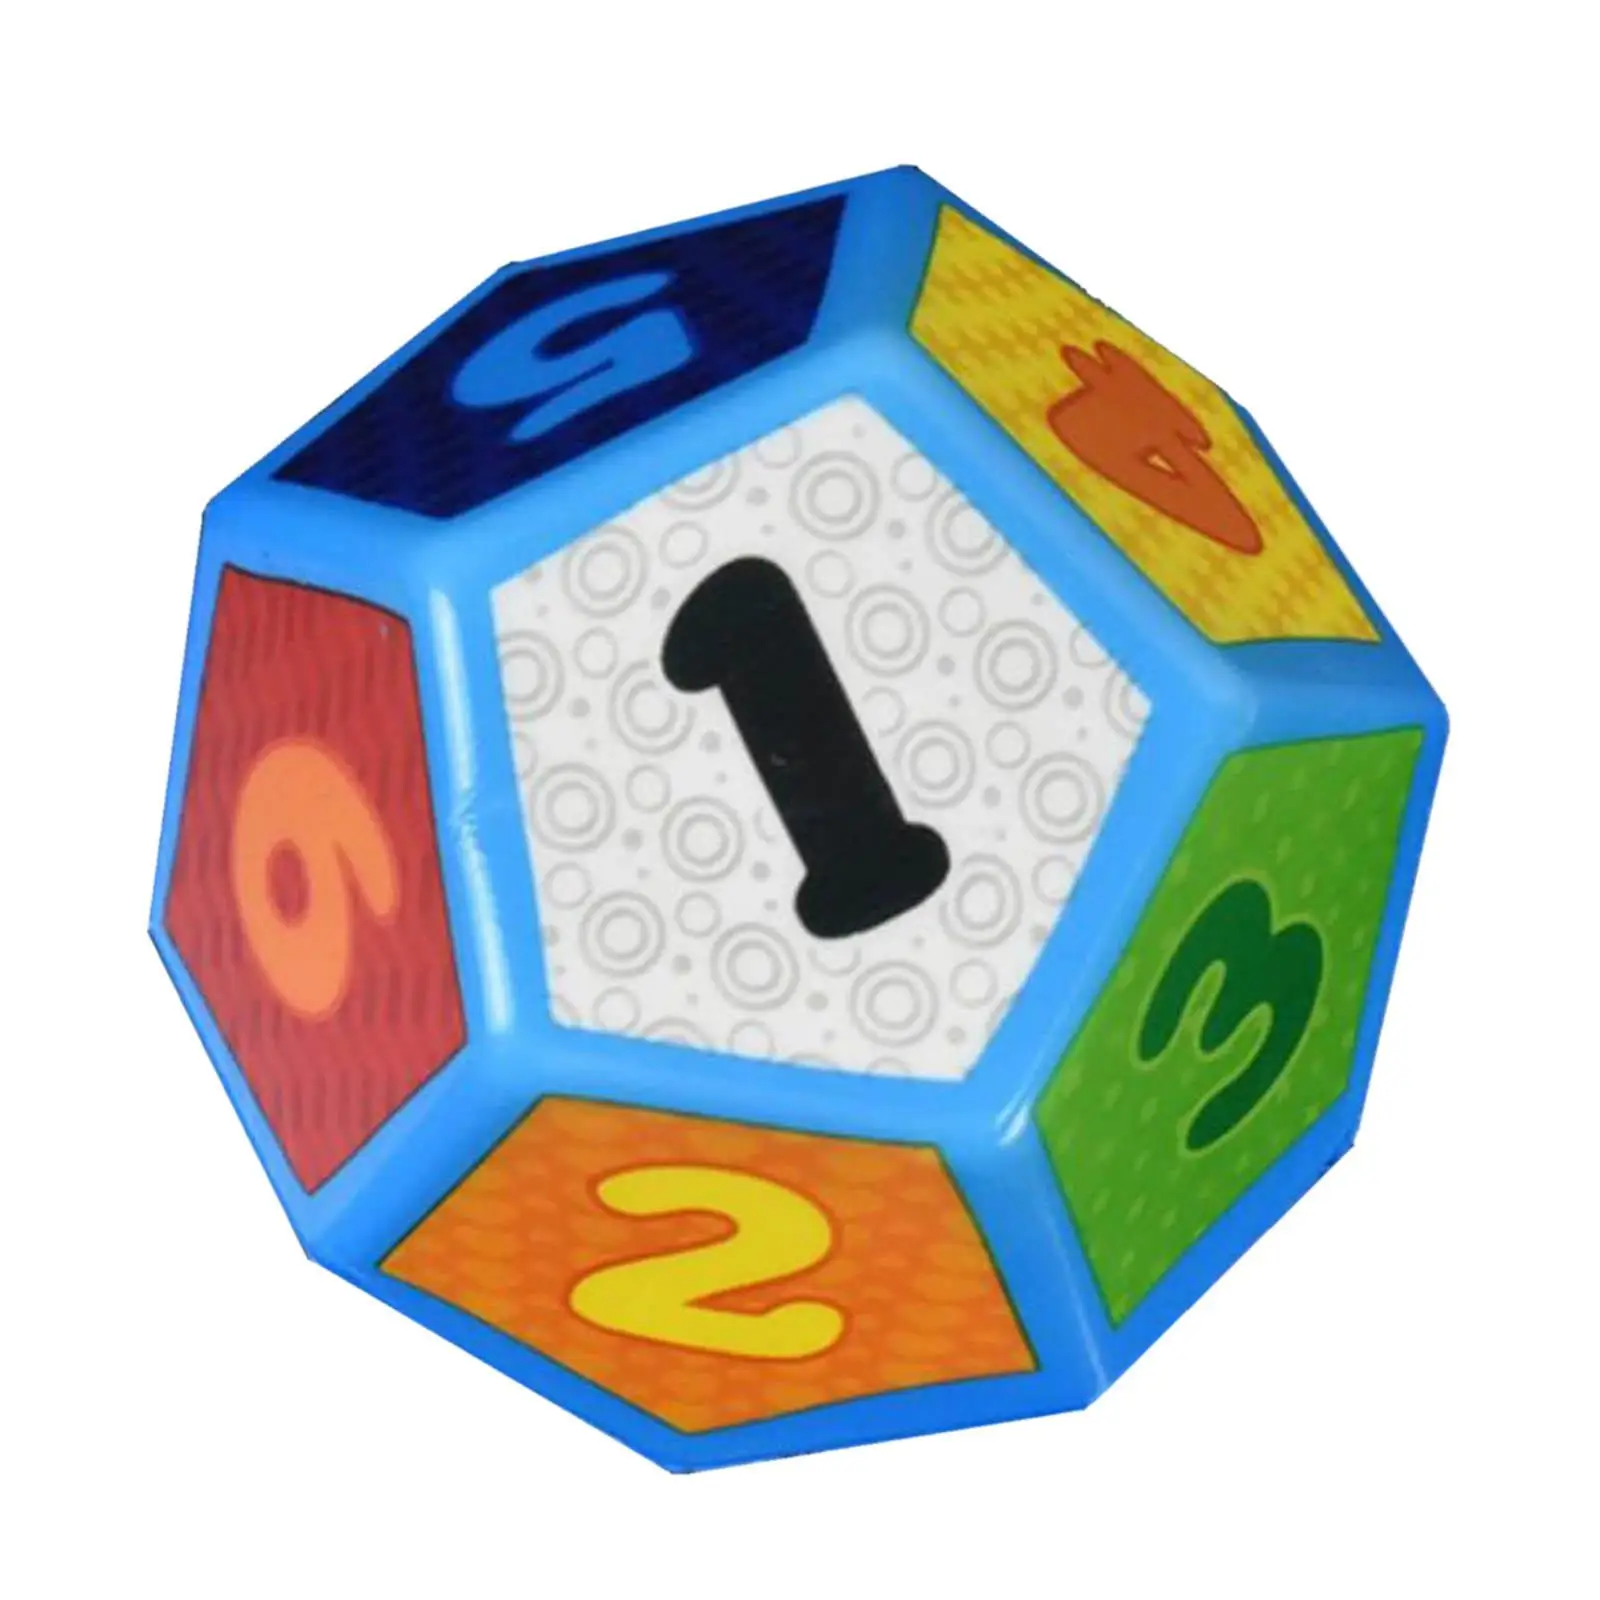 PU 12 Sided Dice 60G Role Playing Game Play Entertainment Toys Kids Foam Die for ,Family Party Supplies Family Gathering Gifts